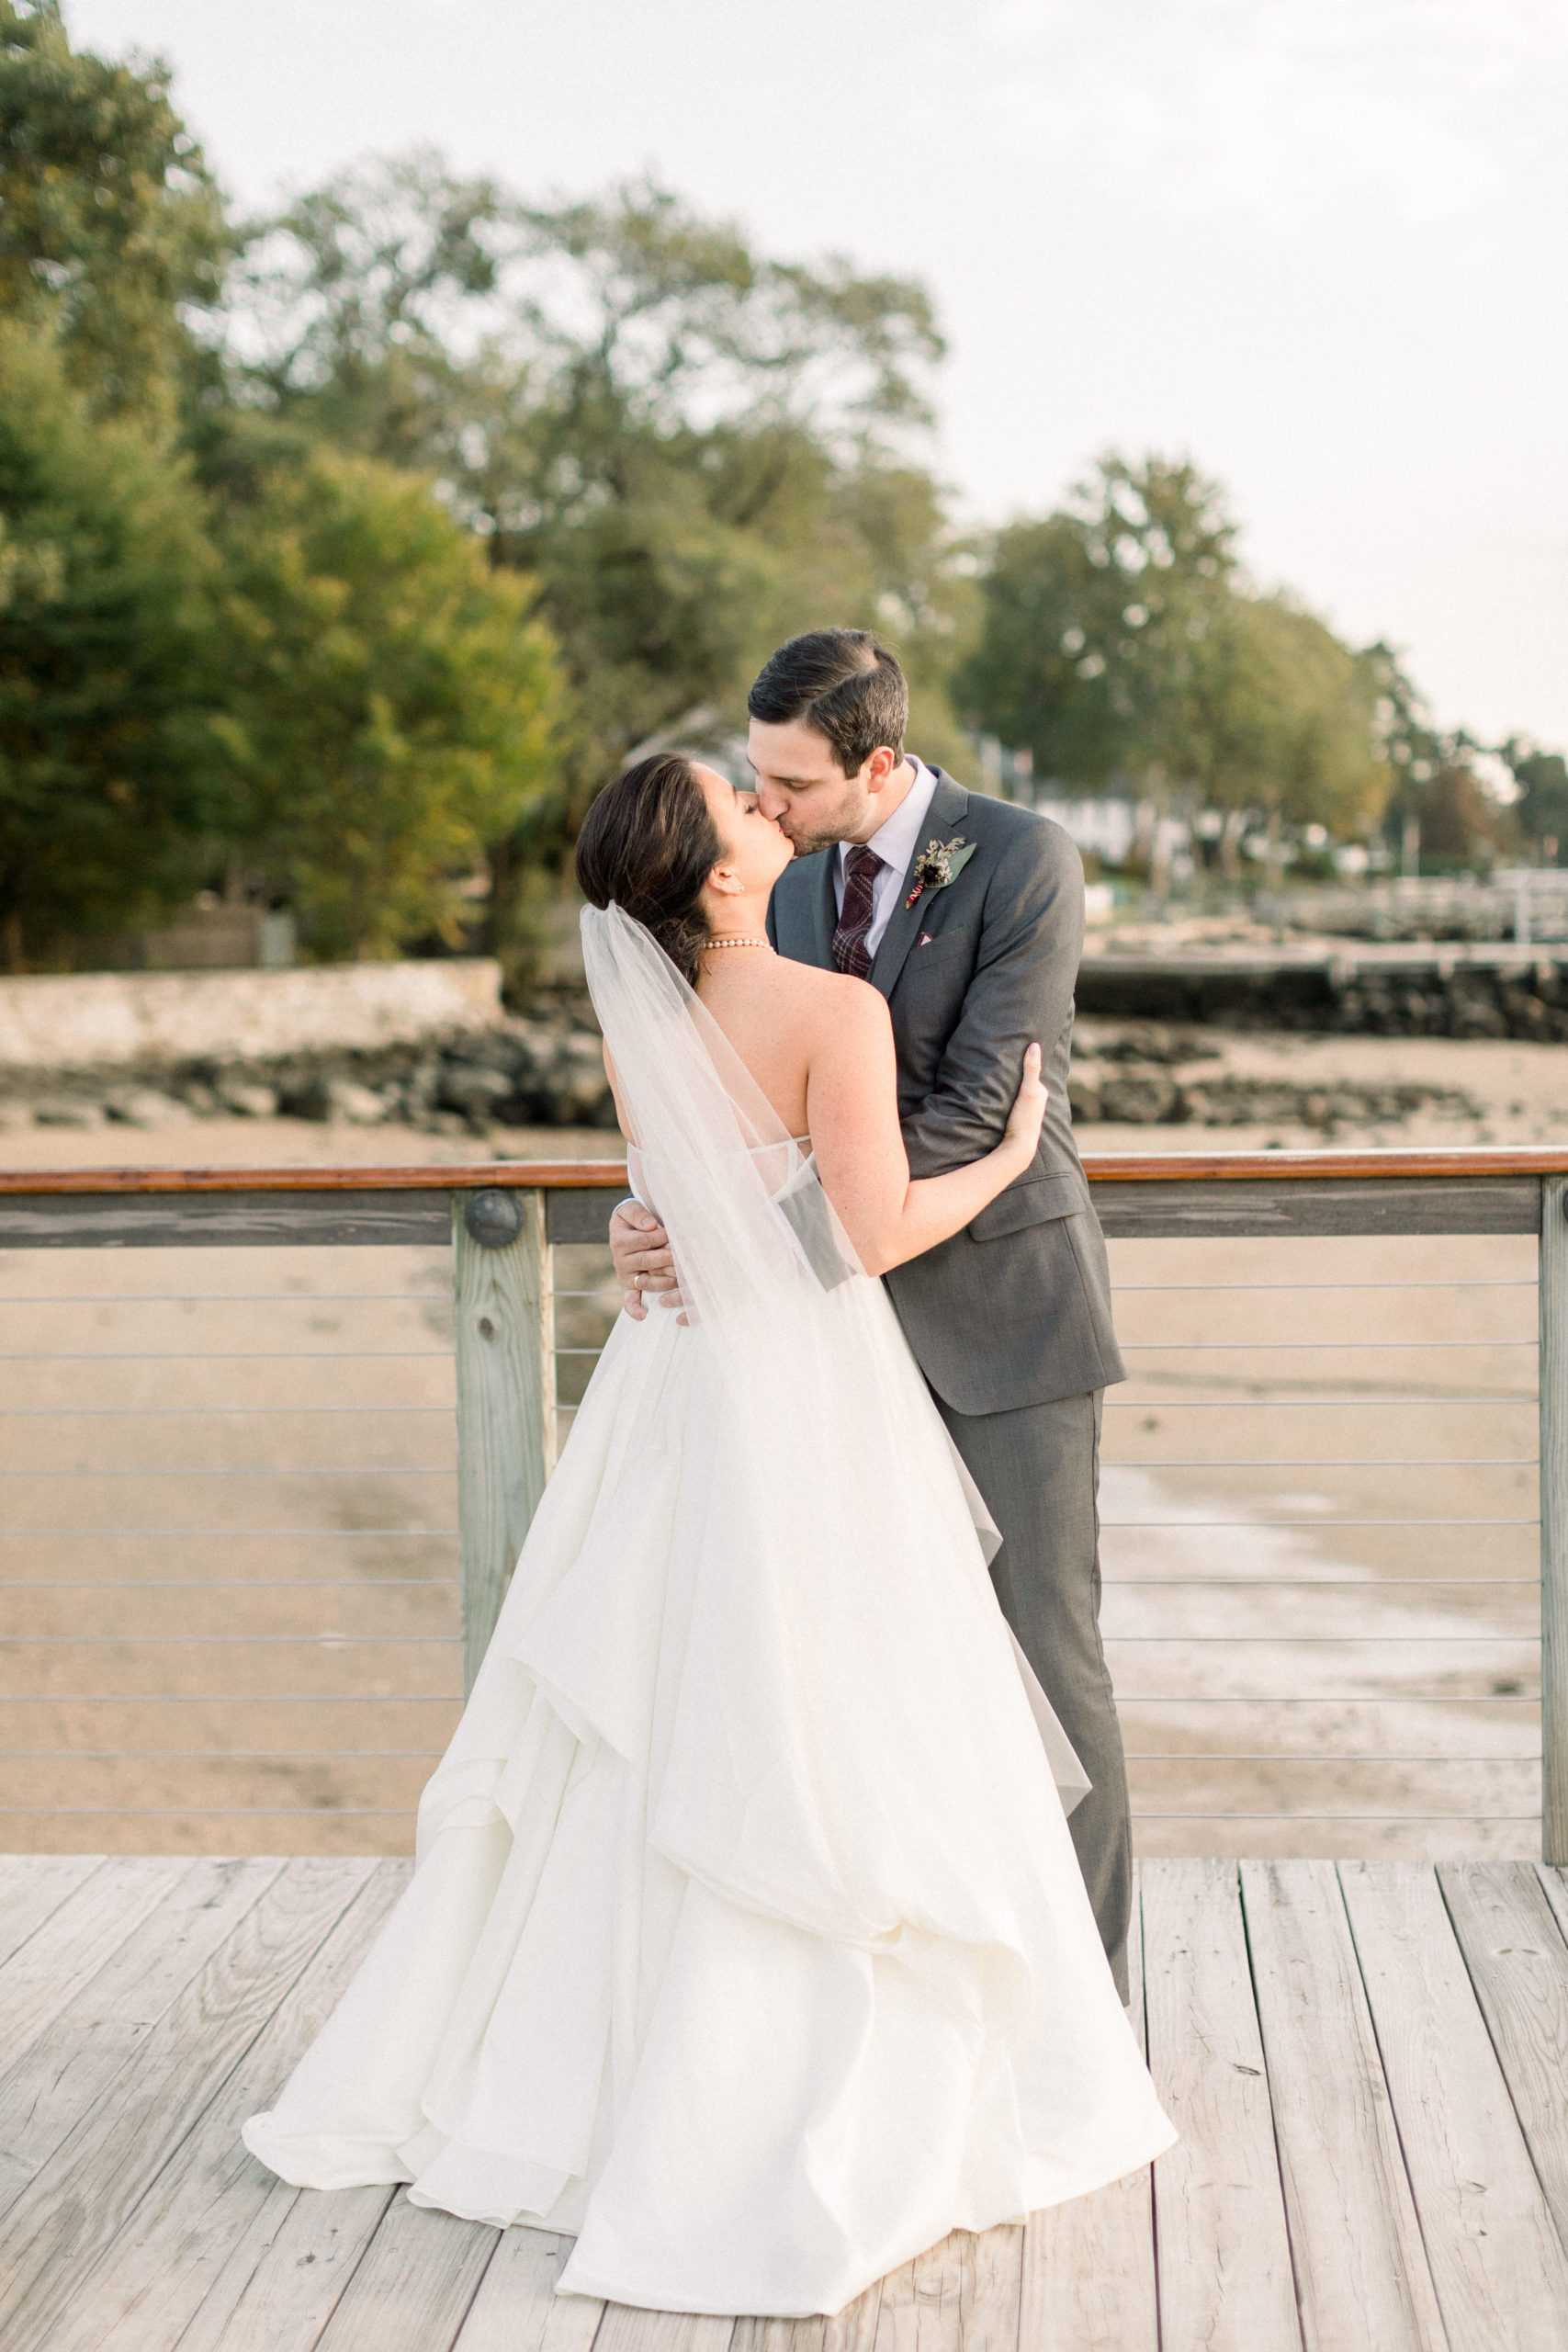 Stamford Yacht Club Wedding - CT wedding sunset photos with classic BLHDN strapless dress